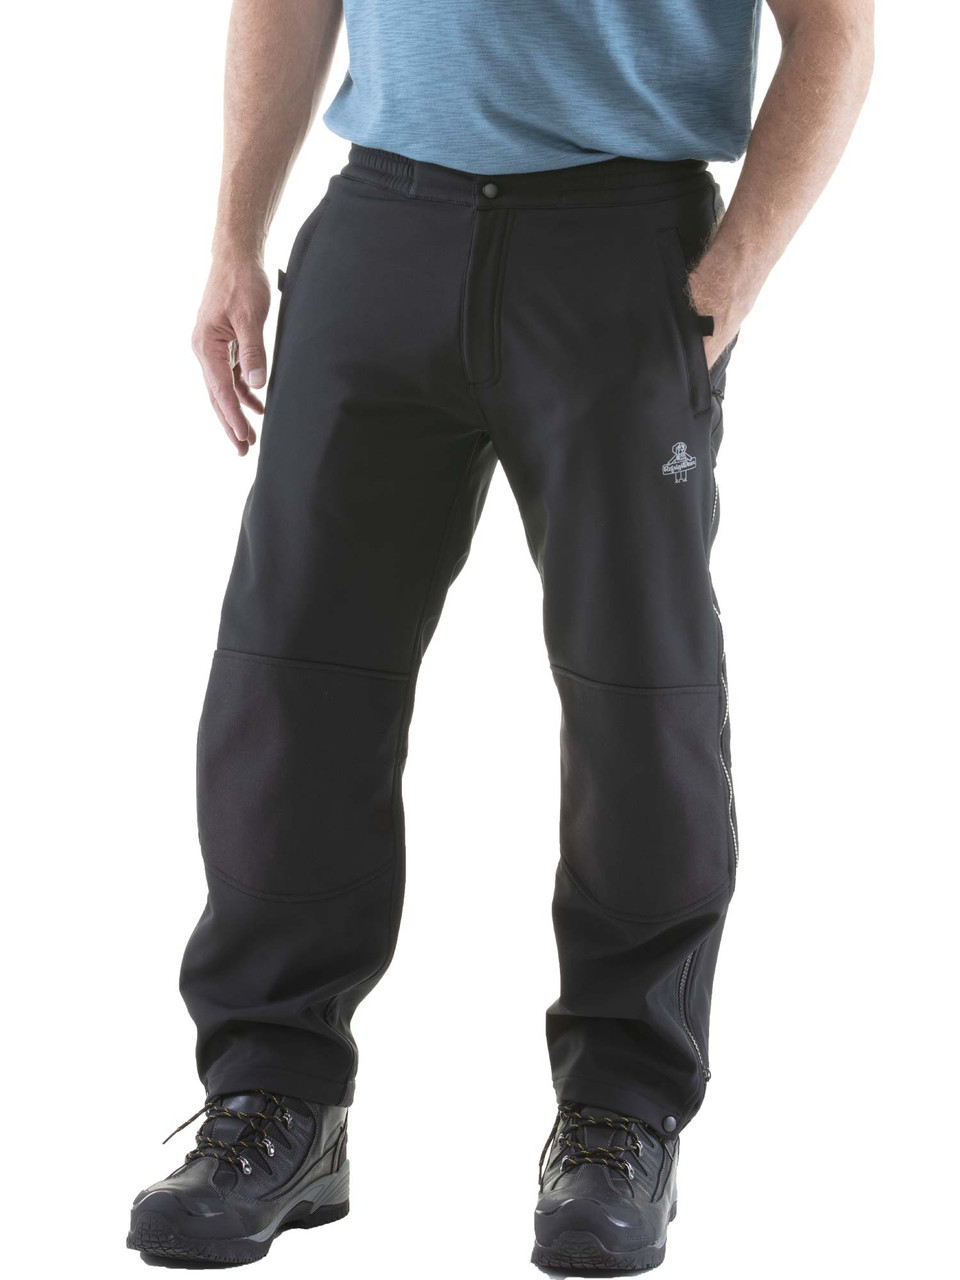 Insulated Softshell Pants (9440), Rated for -20°F